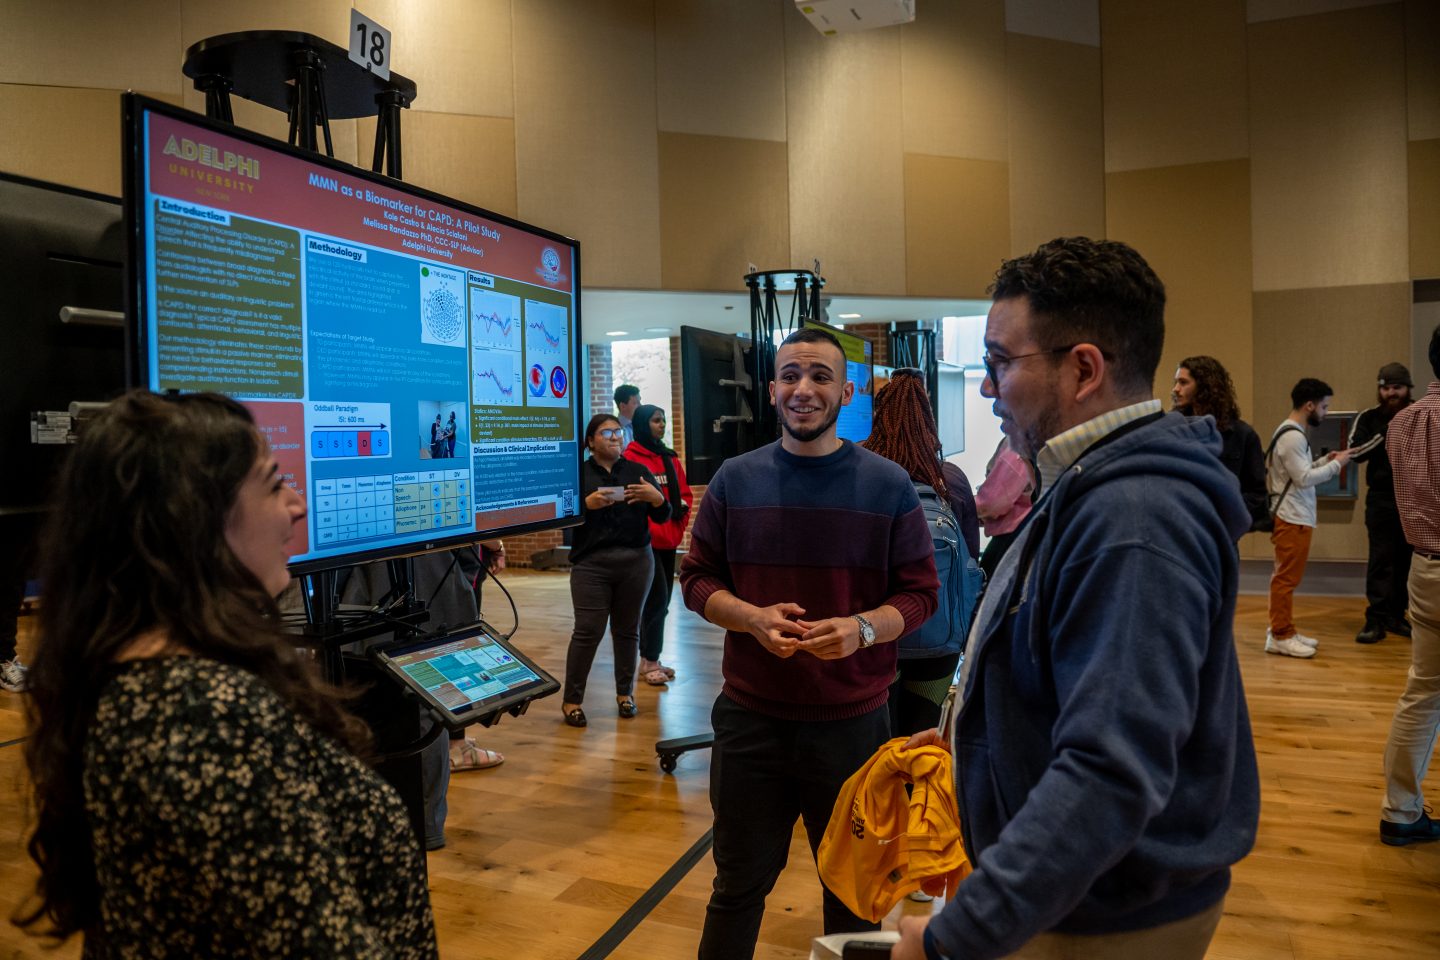 Three students standing by an e-poster discuss a 2023 Research Day presentation on biomarkers in the University Center.